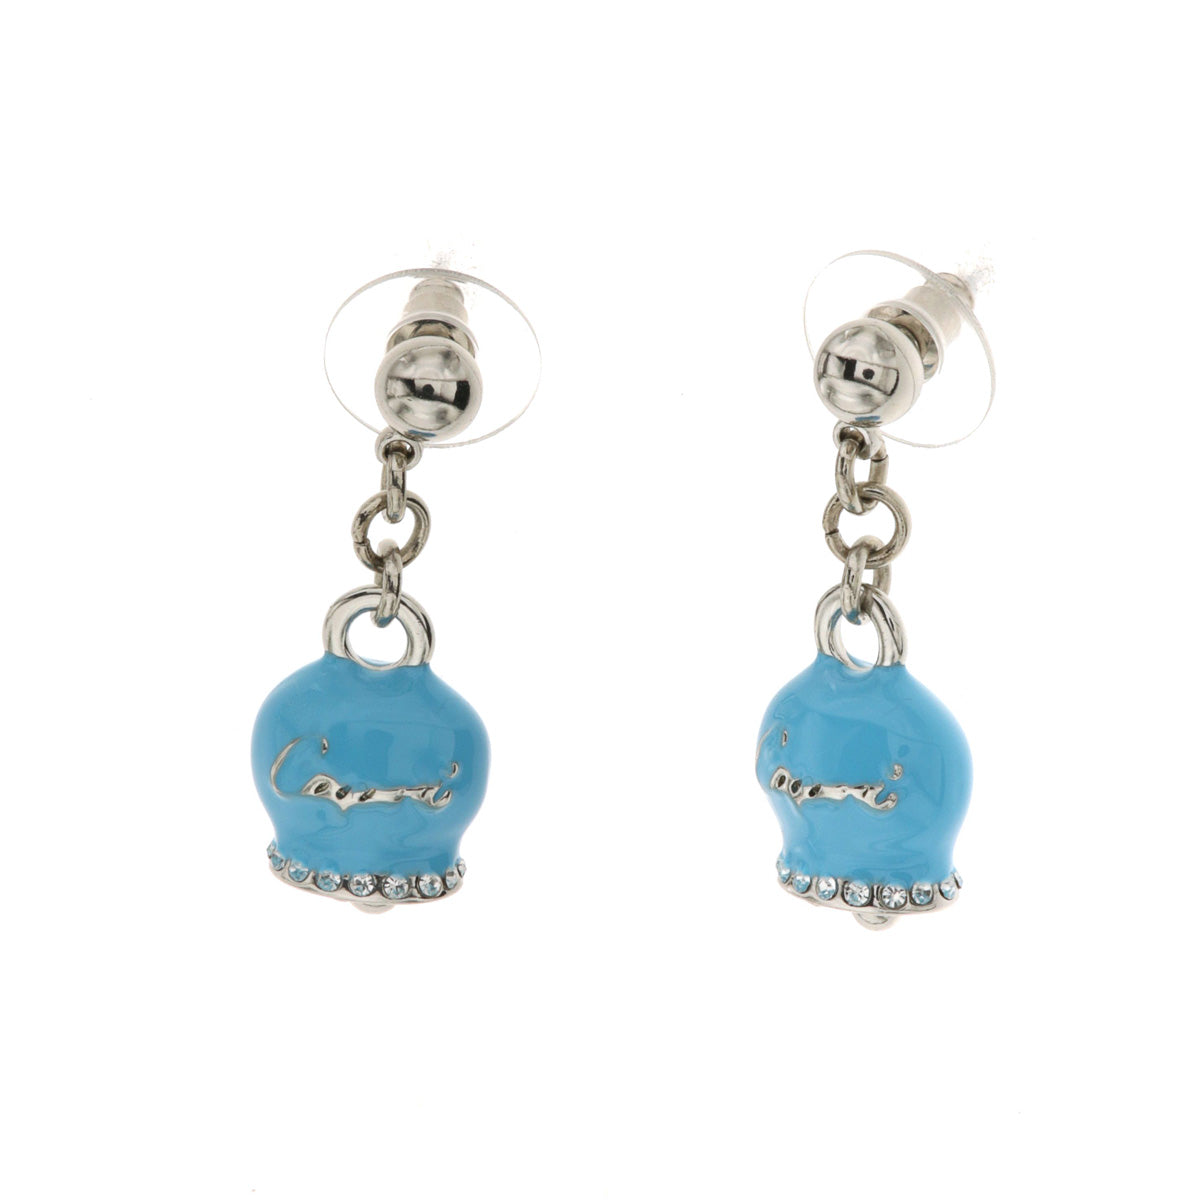 Metal earrings with bell Capri pendant in blue enamel, embellished with crystals